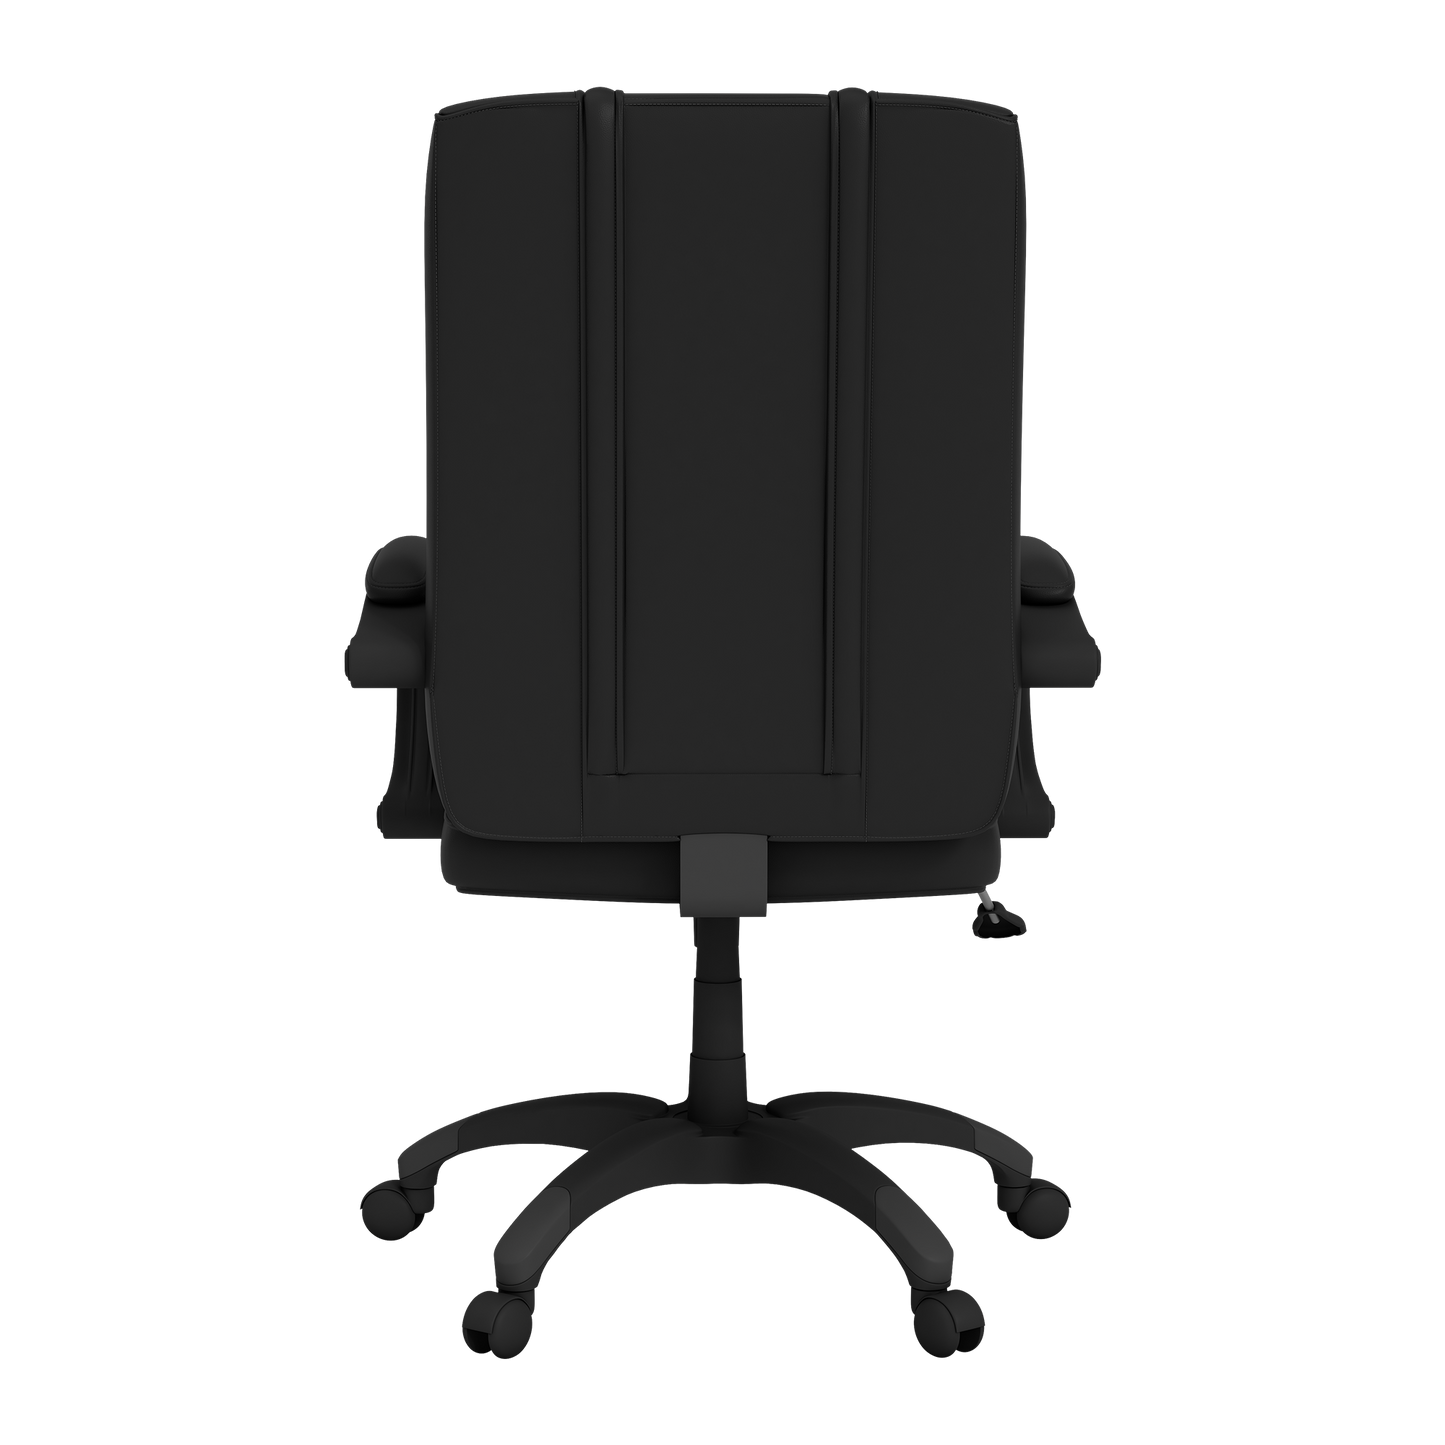 Office Chair 1000 with  Las Vegas Raiders Primary Logo